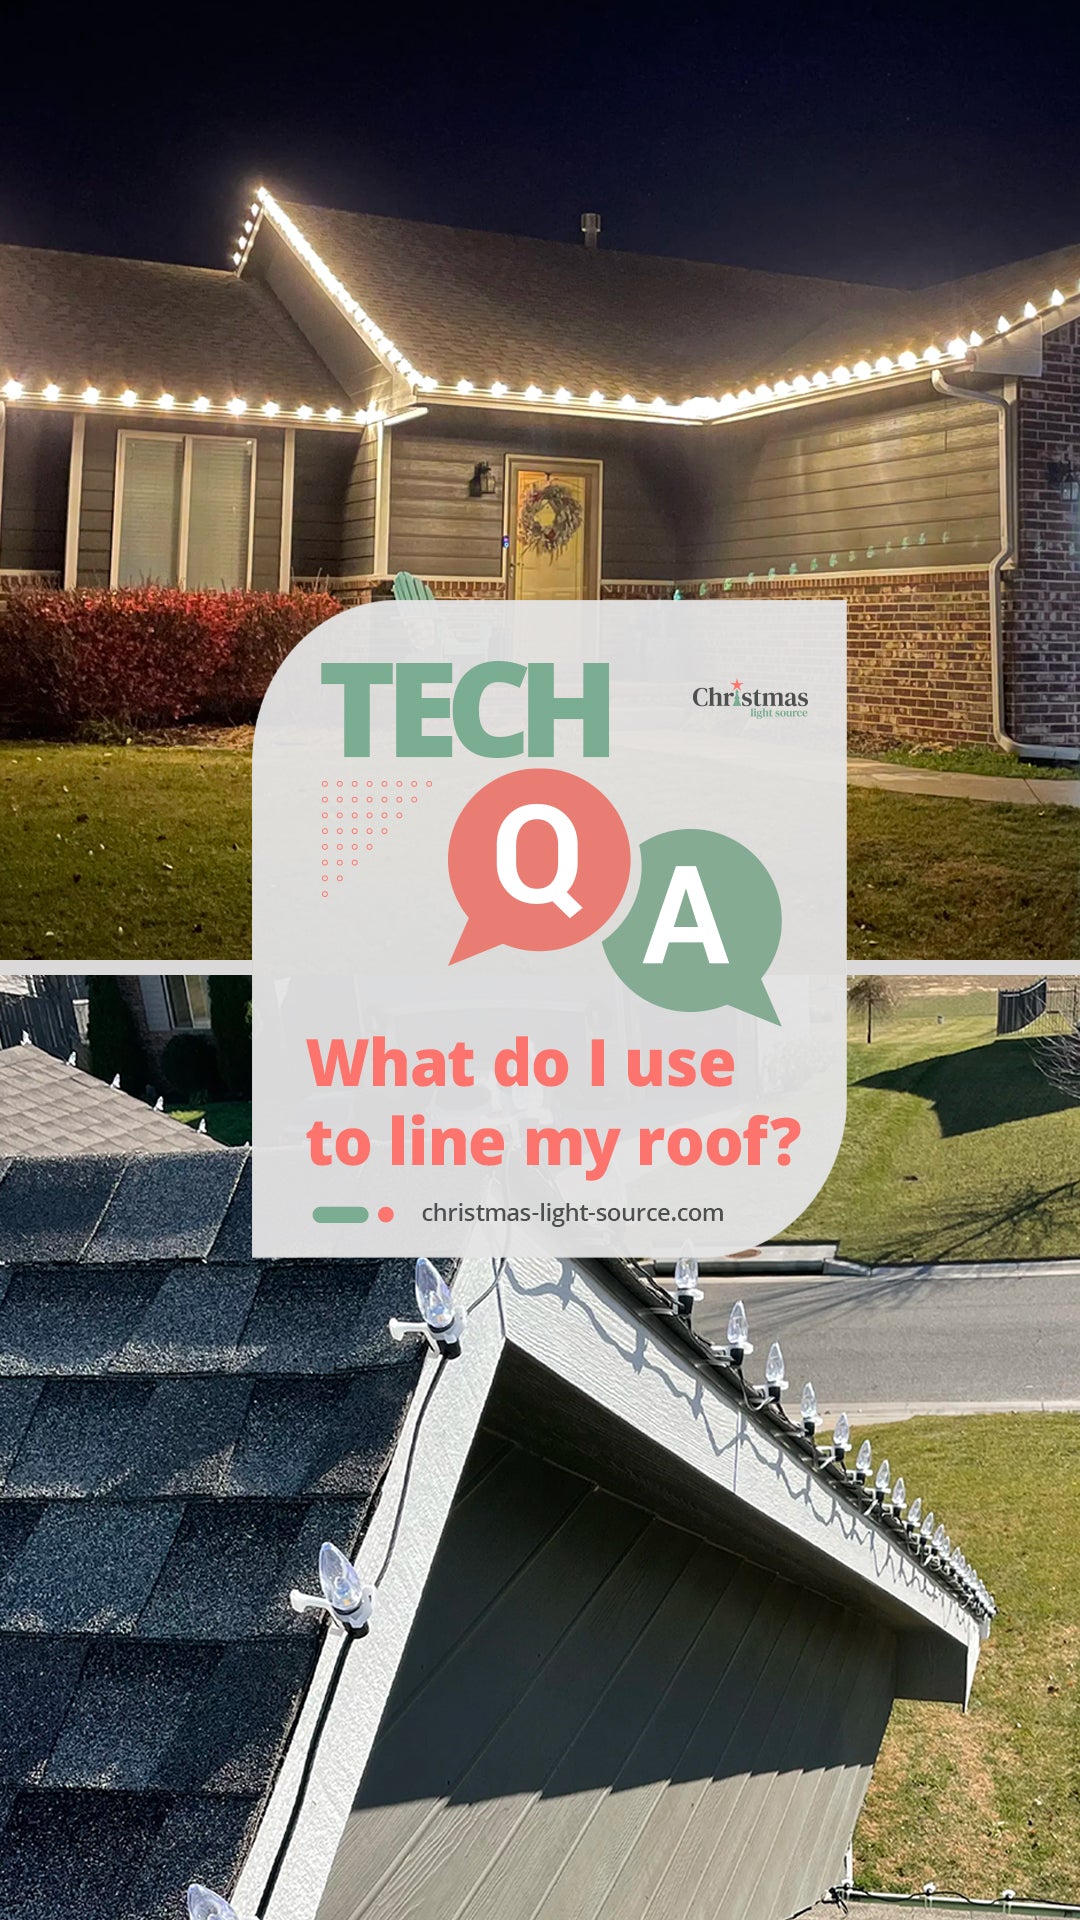 Q/A: What do I use to line my roof?